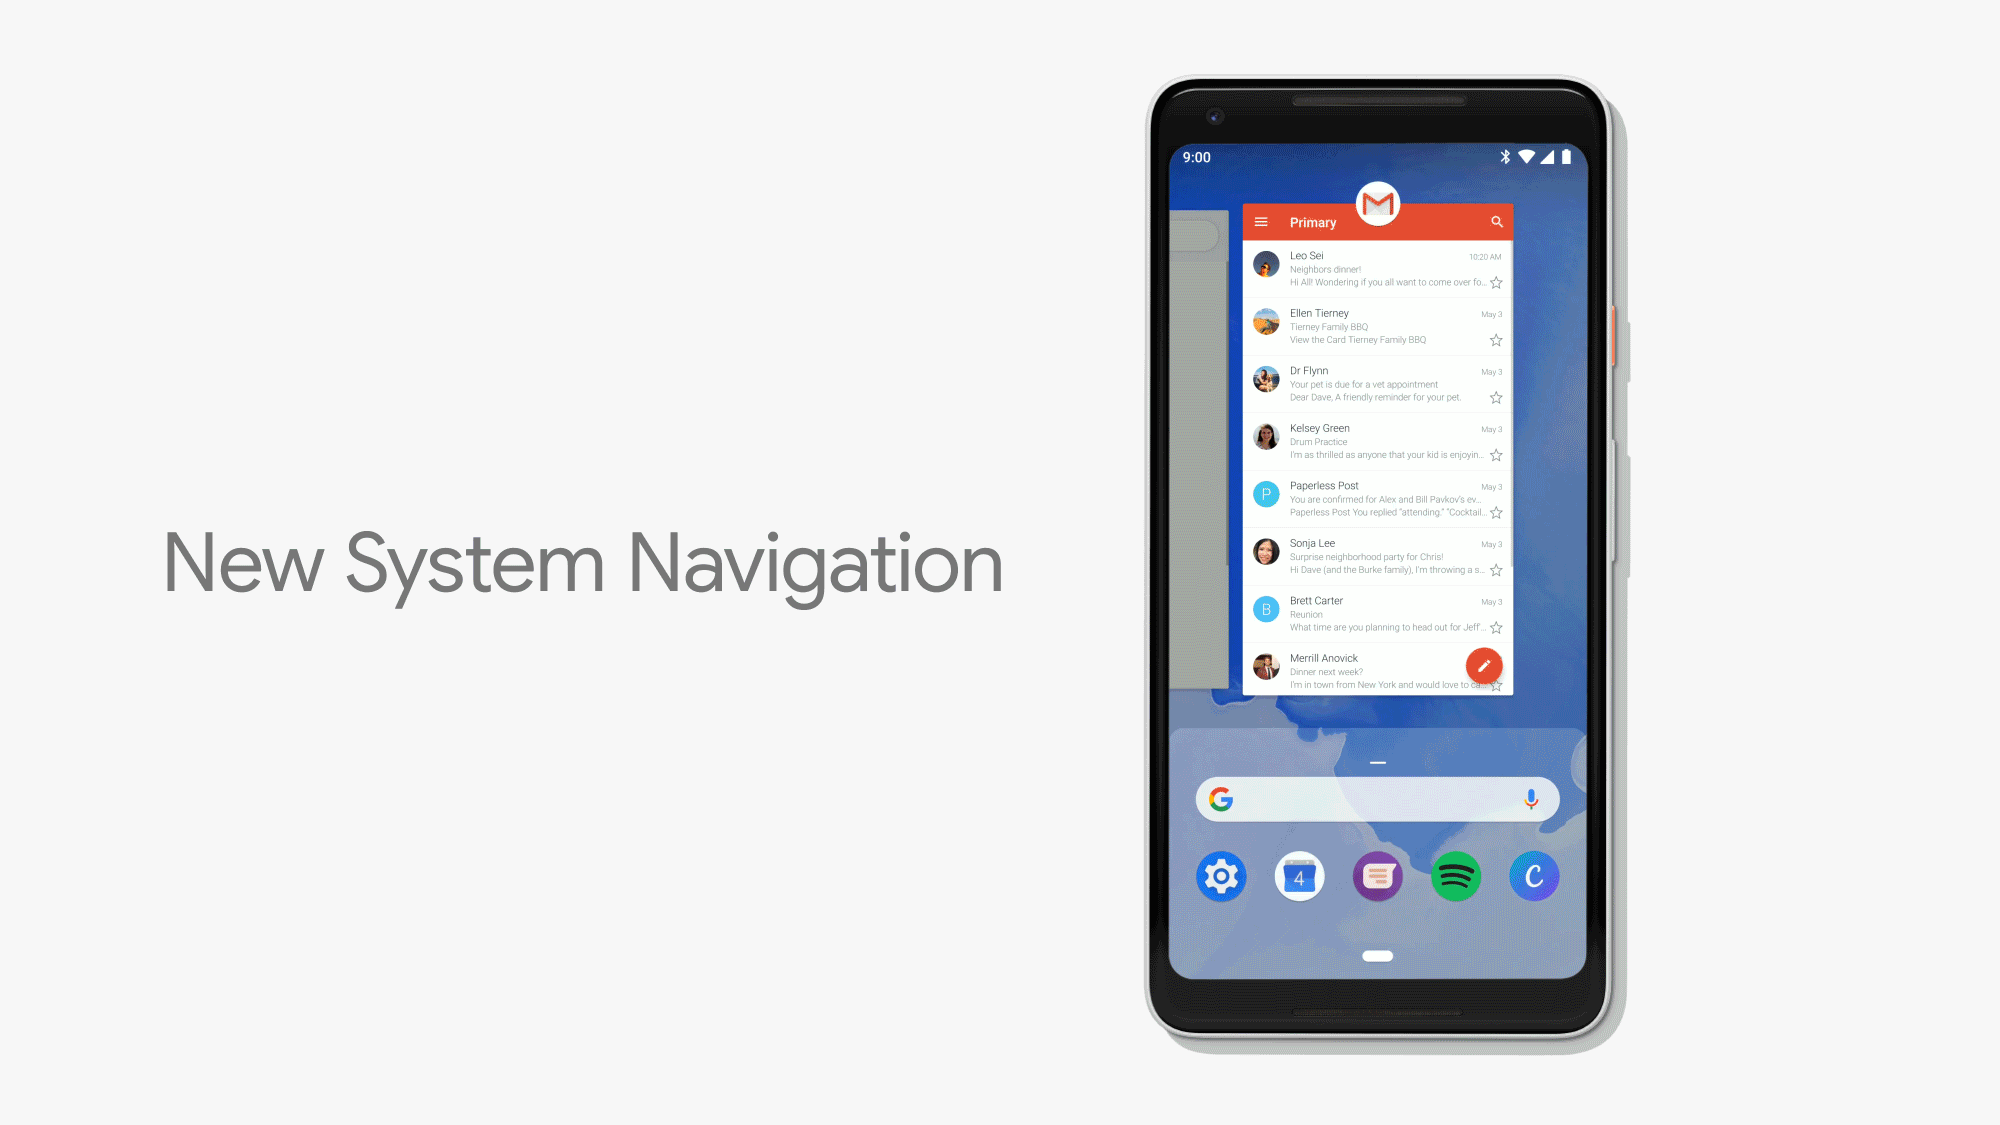 Android P - New System Navigation